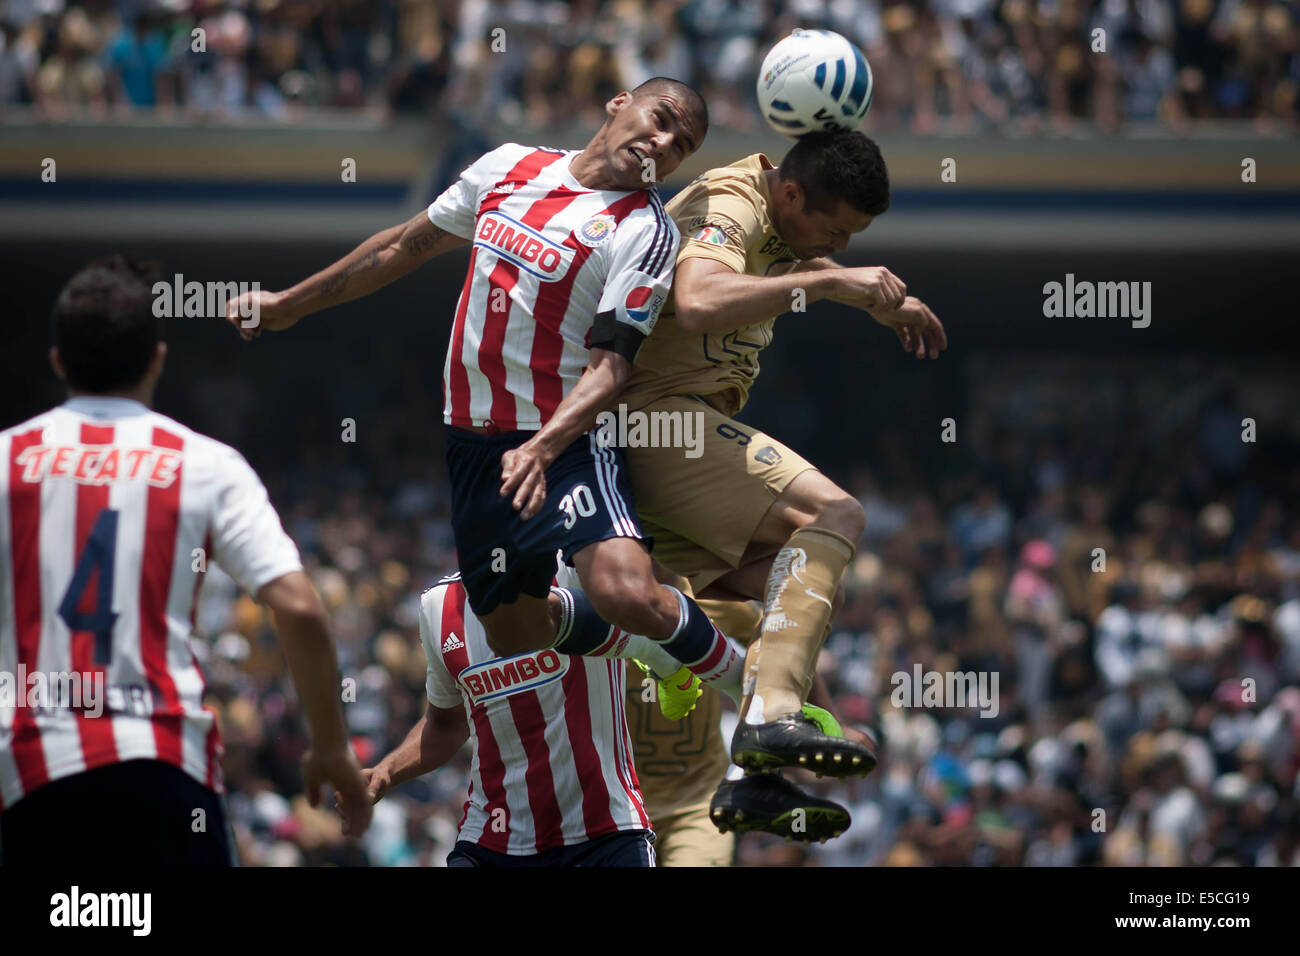 Mexico City, Mexico. 27th July, 2014. Dante Lopez (R) of UNAM's Pumas, vies the ball with Chivas' Carlos Salcido (L), during the match of the MX League Opening Tournament, held at Universitary Olympic Stadium in Mexico City, capital of Mexico, on July 27, 2014. © Pedro Mera/Xinhua/Alamy Live News Stock Photo